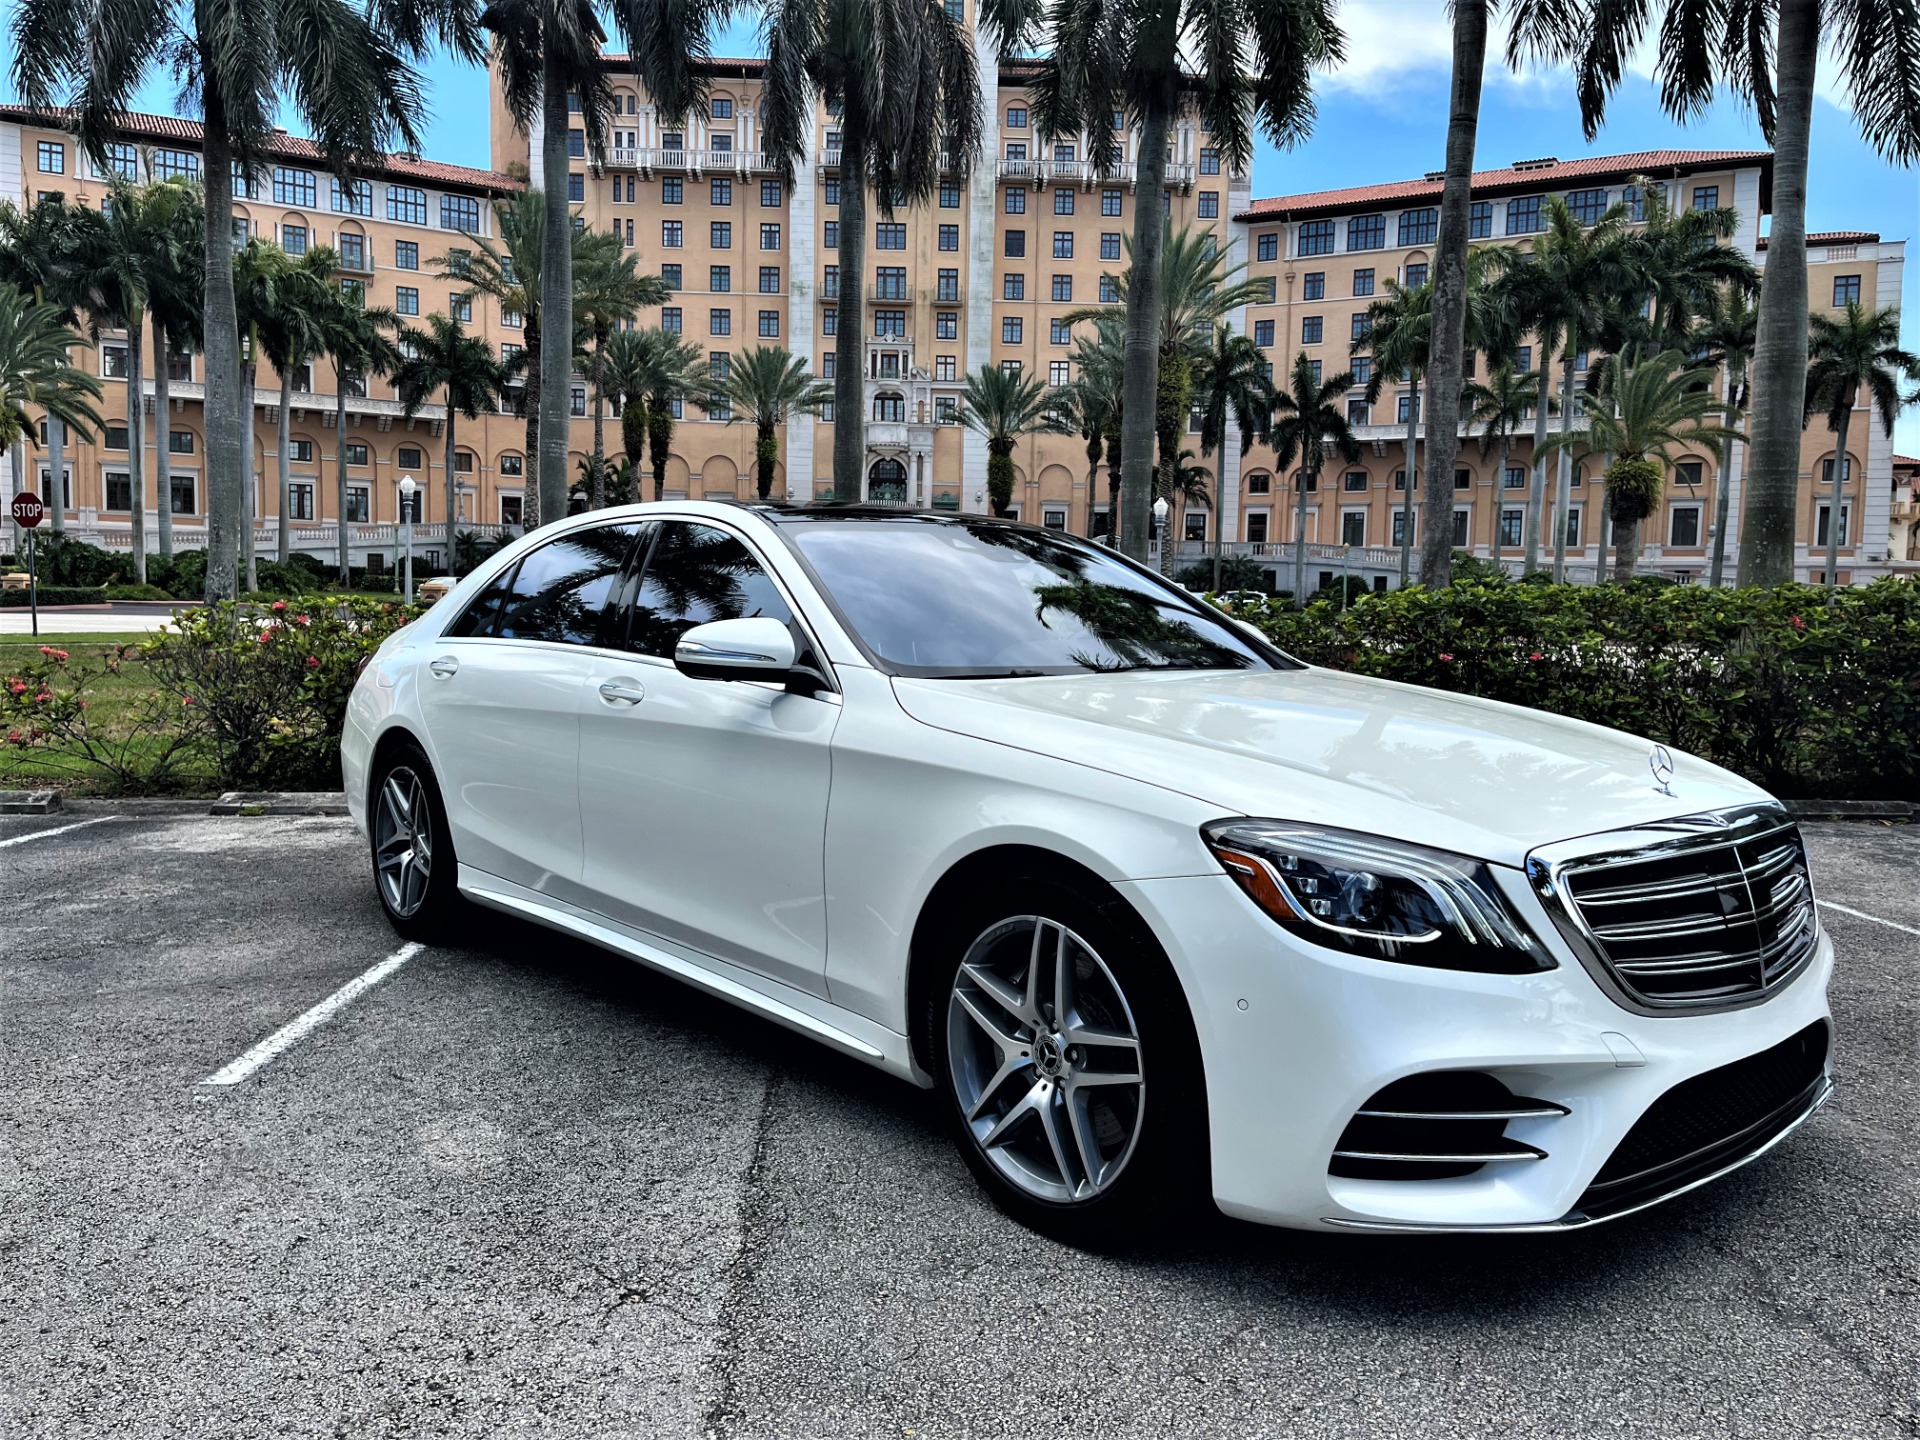 Used 2019 Mercedes-Benz S-Class S 560 4MATIC for sale Sold at The Gables Sports Cars in Miami FL 33146 1